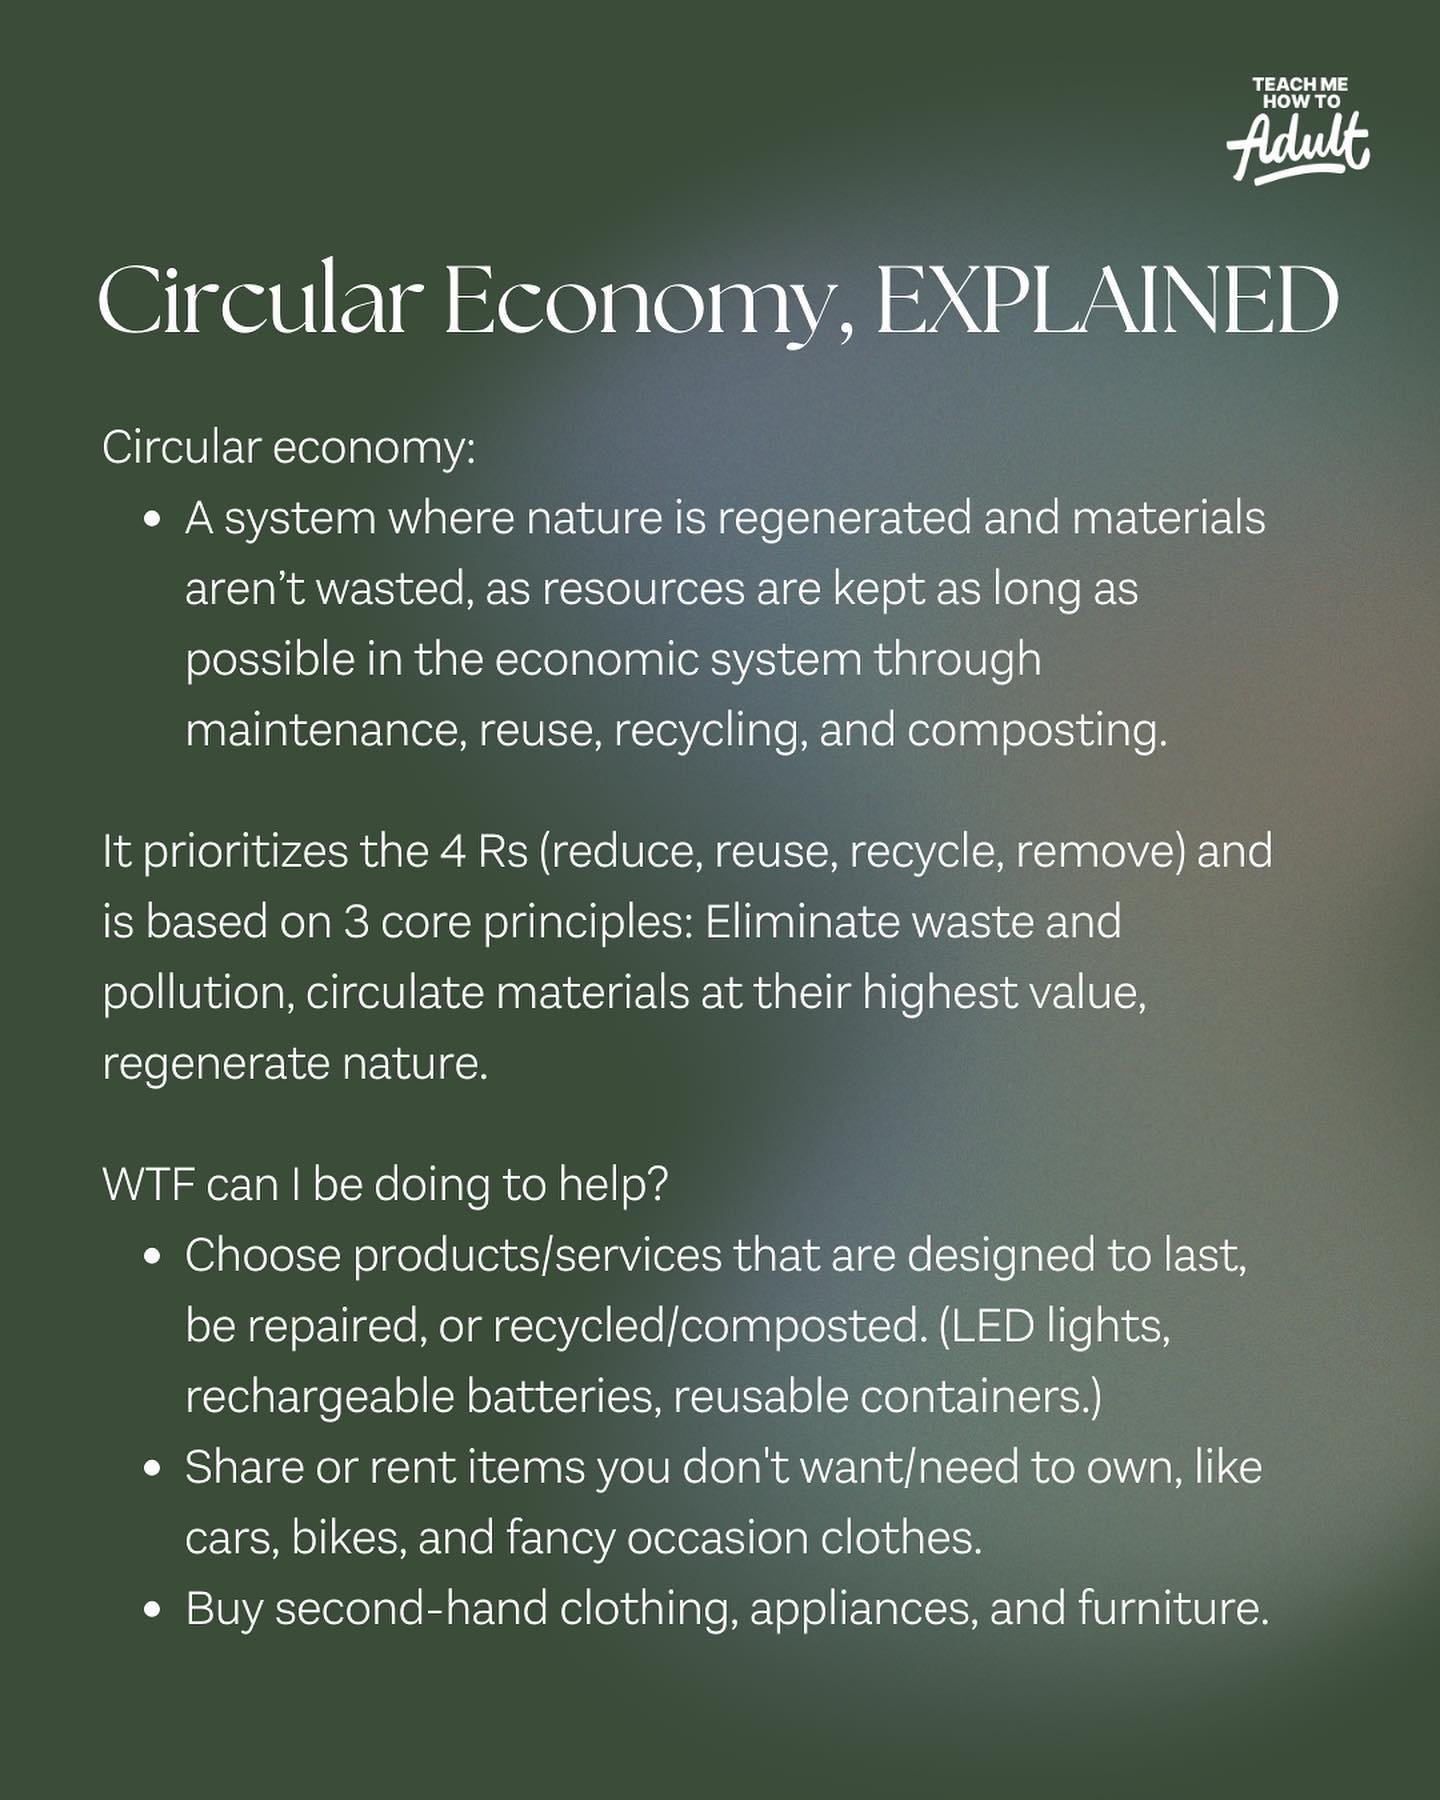 If you&rsquo;ve heard talk of circular economy in sustainability, but you aren&rsquo;t sure what it&rsquo;s all about, you&rsquo;ve come to the right place. For this Earth Day edition of #explained, we&rsquo;re breaking down how moving towards a #cir